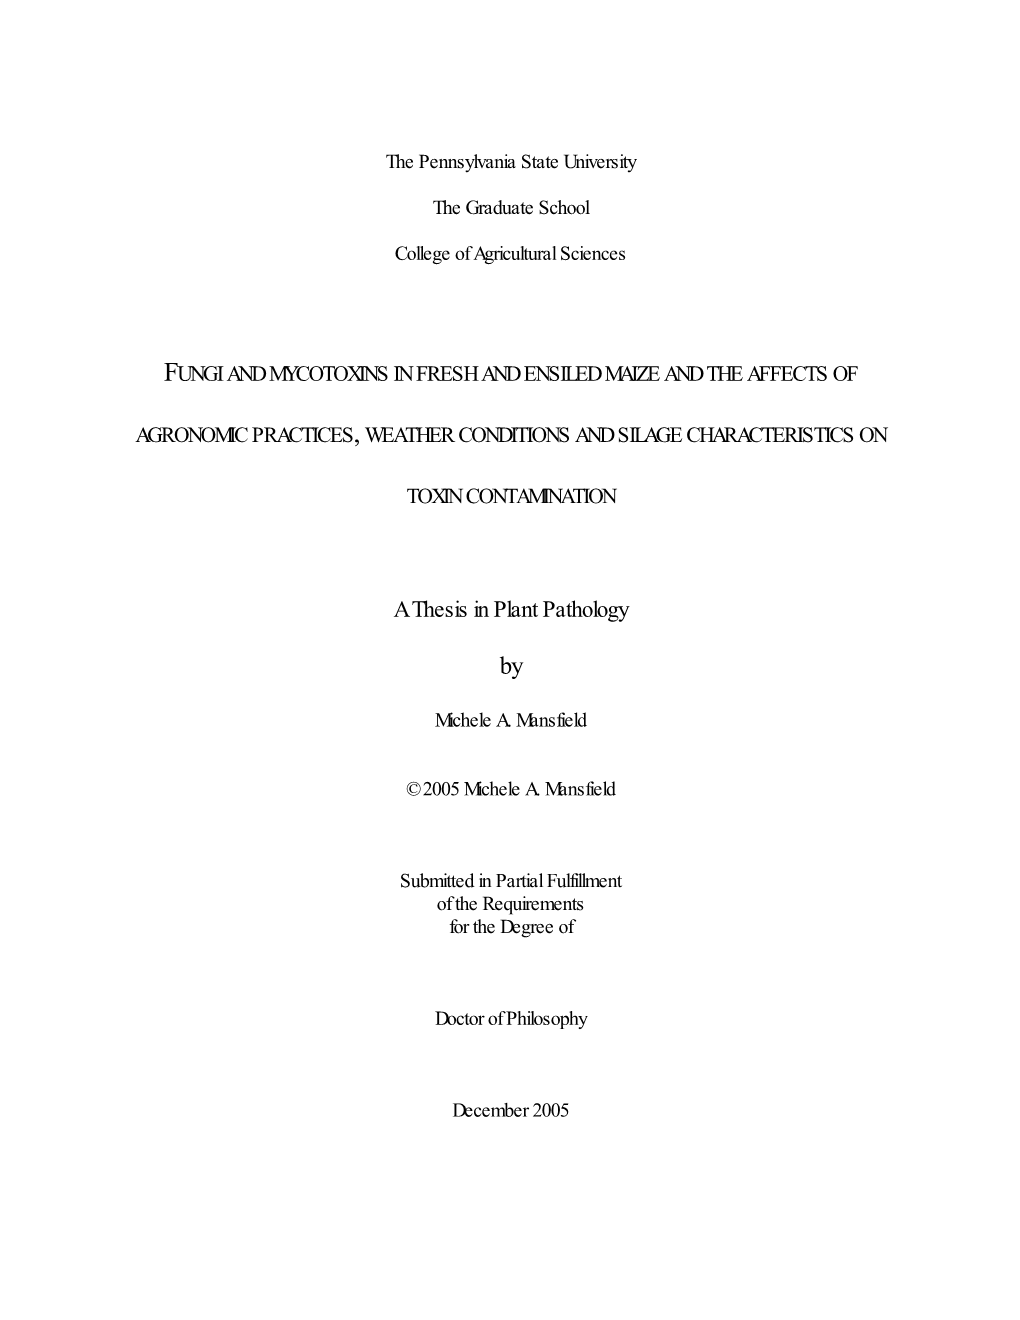 A Thesis in Plant Pathology